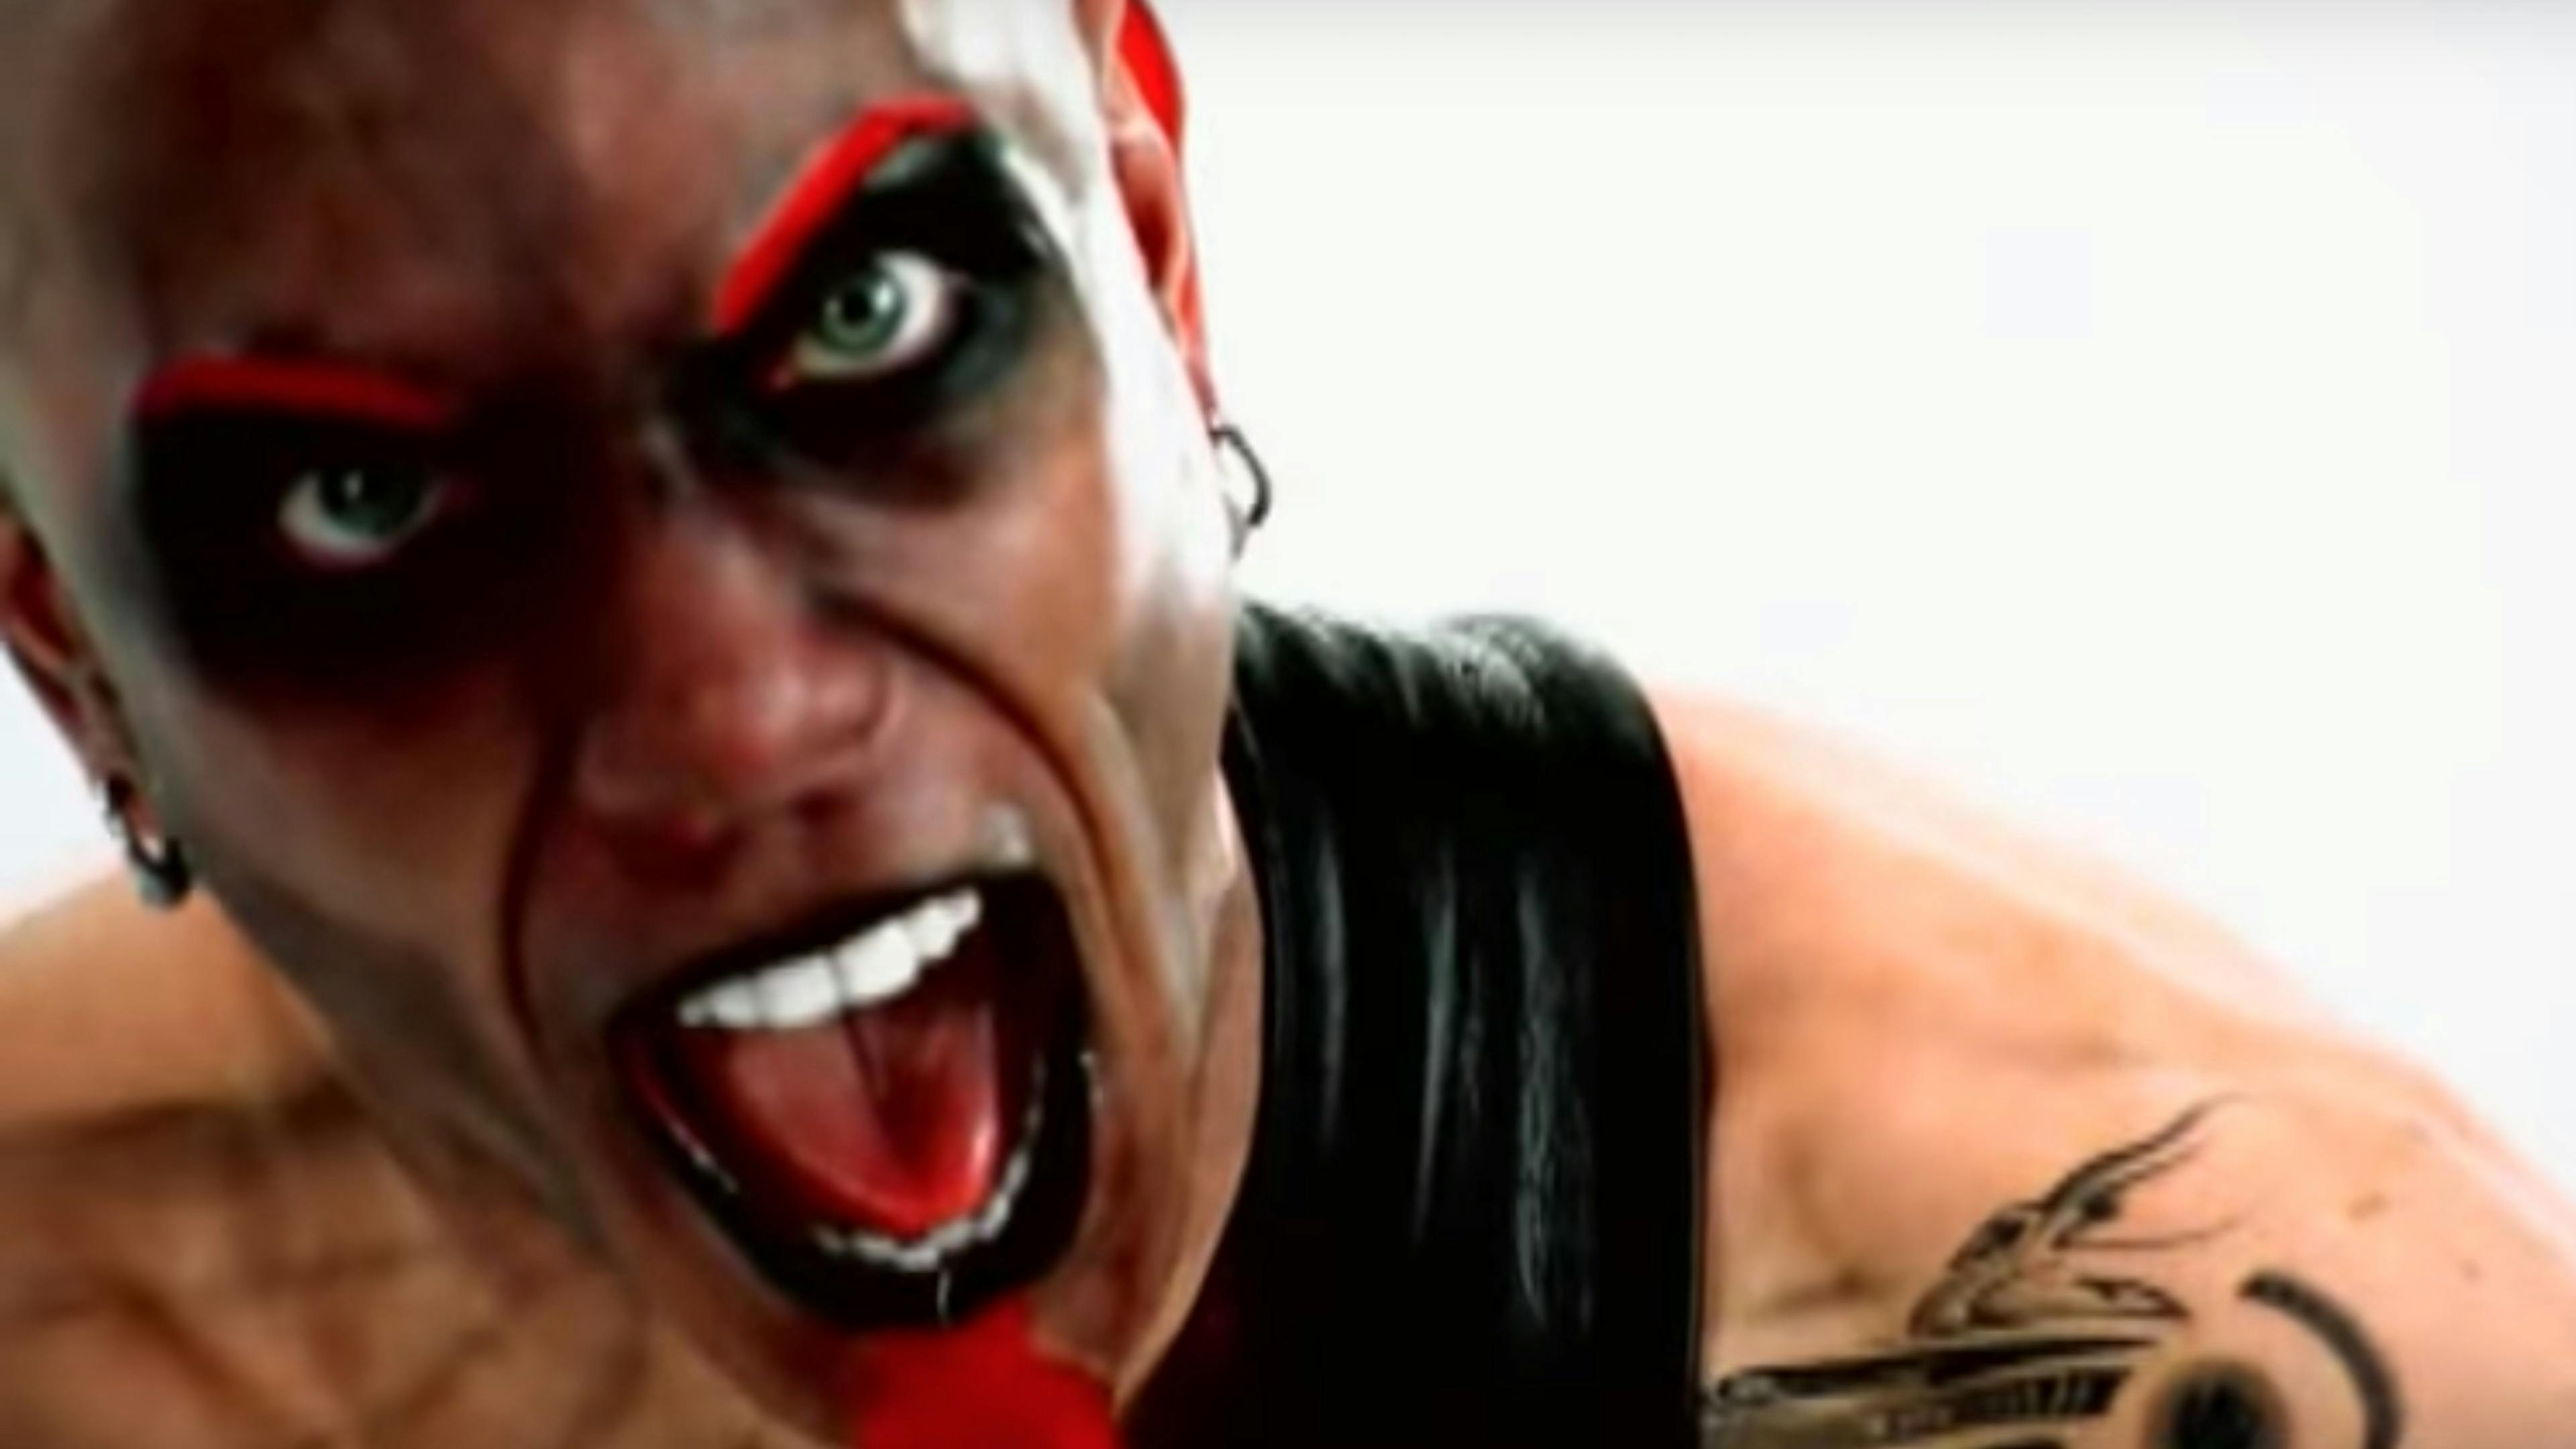 Here's The Intro To Mudvayne's Dig For Ten Hours Straight